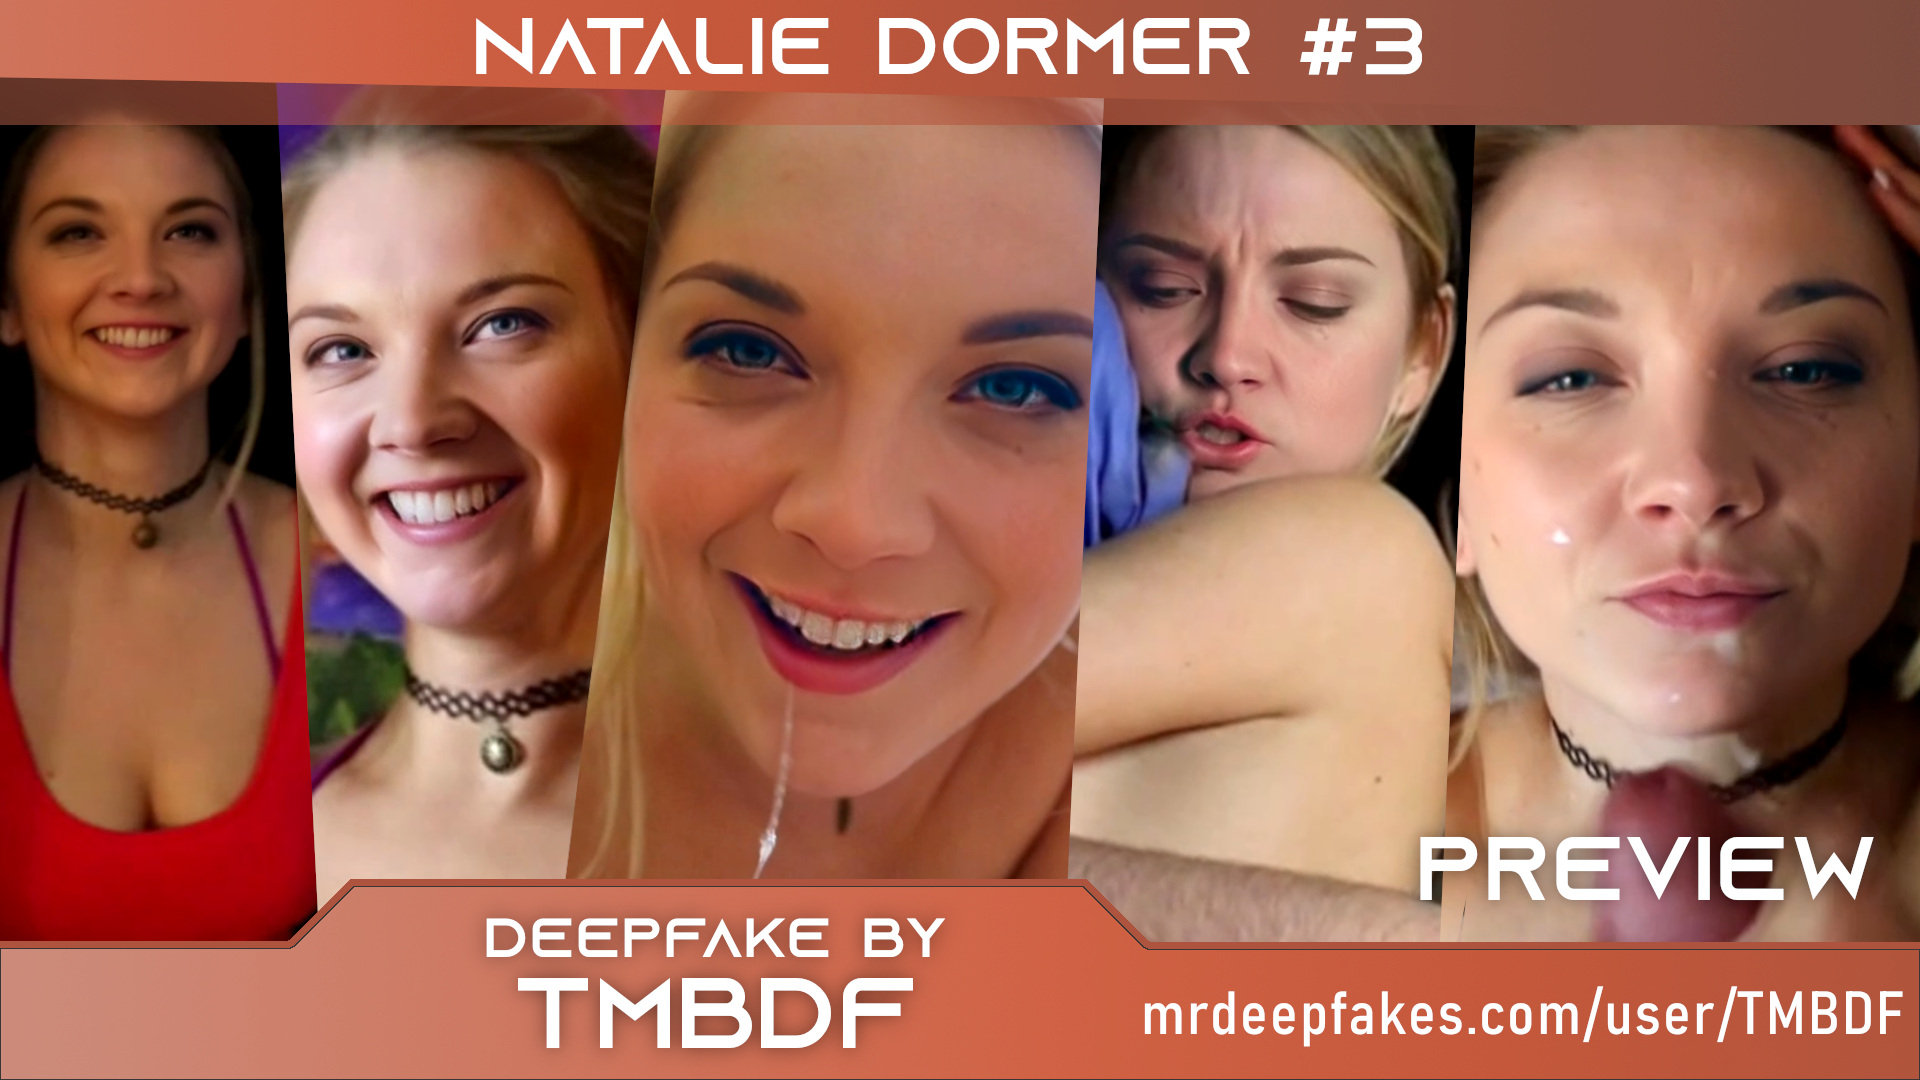 Natalie Dormer #3 - PREVIEW - Full version (14:00) accessible using tokens/crypto